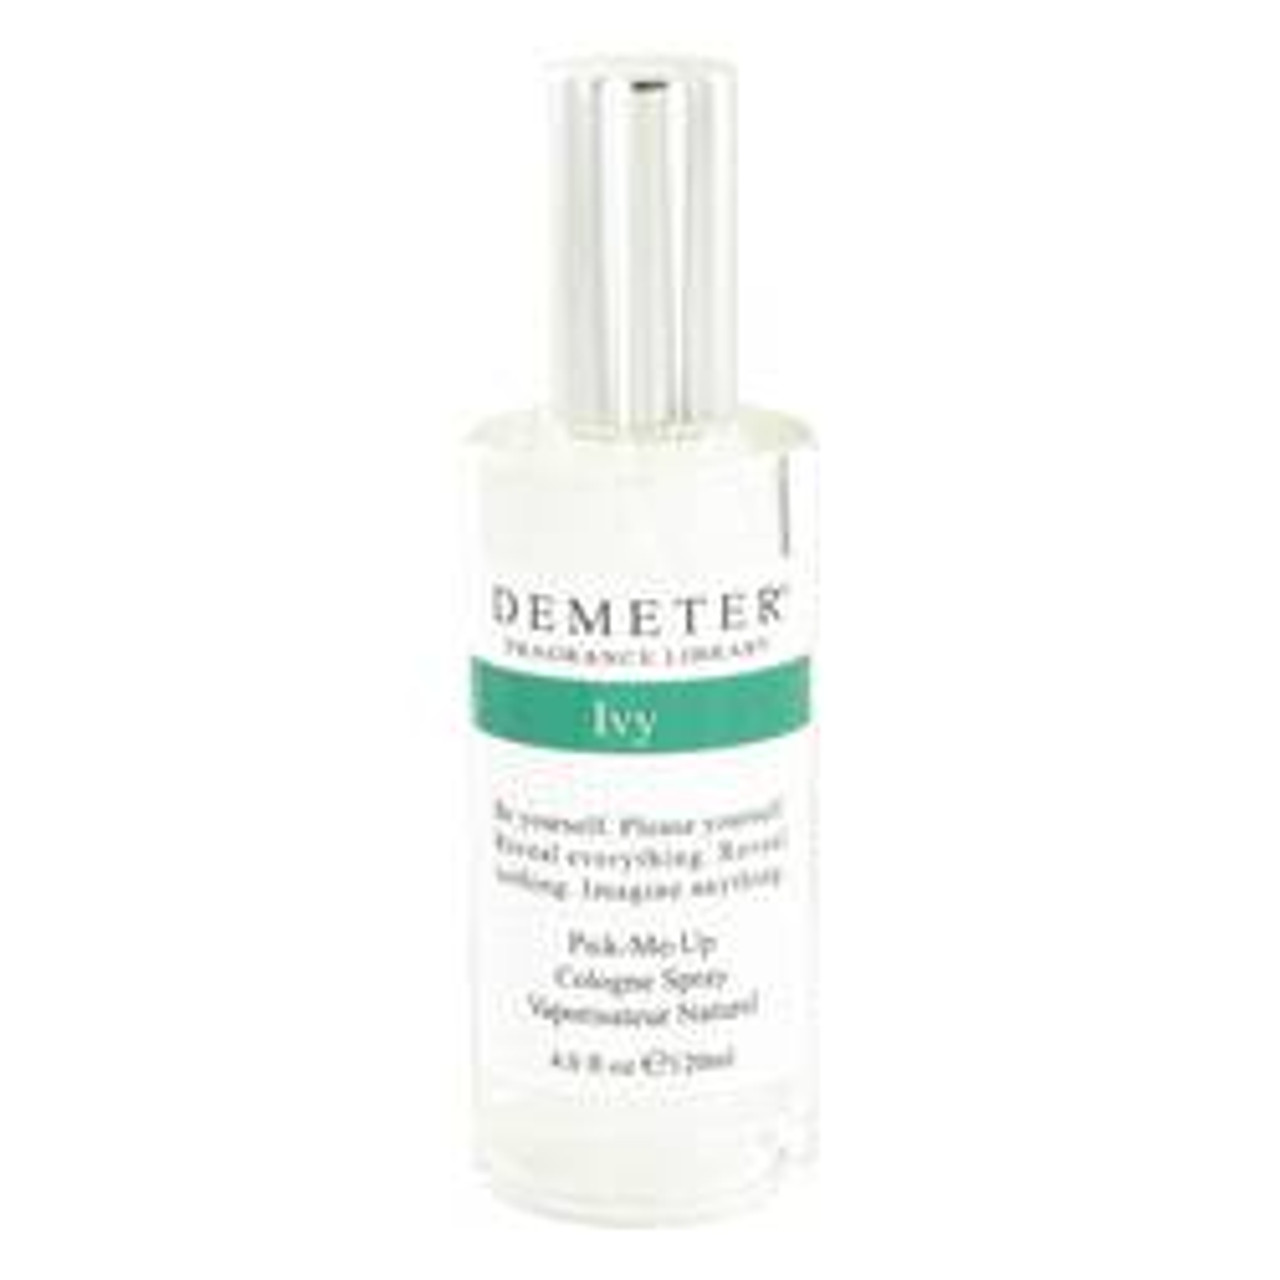 Demeter Ivy Perfume By Demeter Cologne Spray 4 oz for Women - [From 79.50 - Choose pk Qty ] - *Ships from Miami